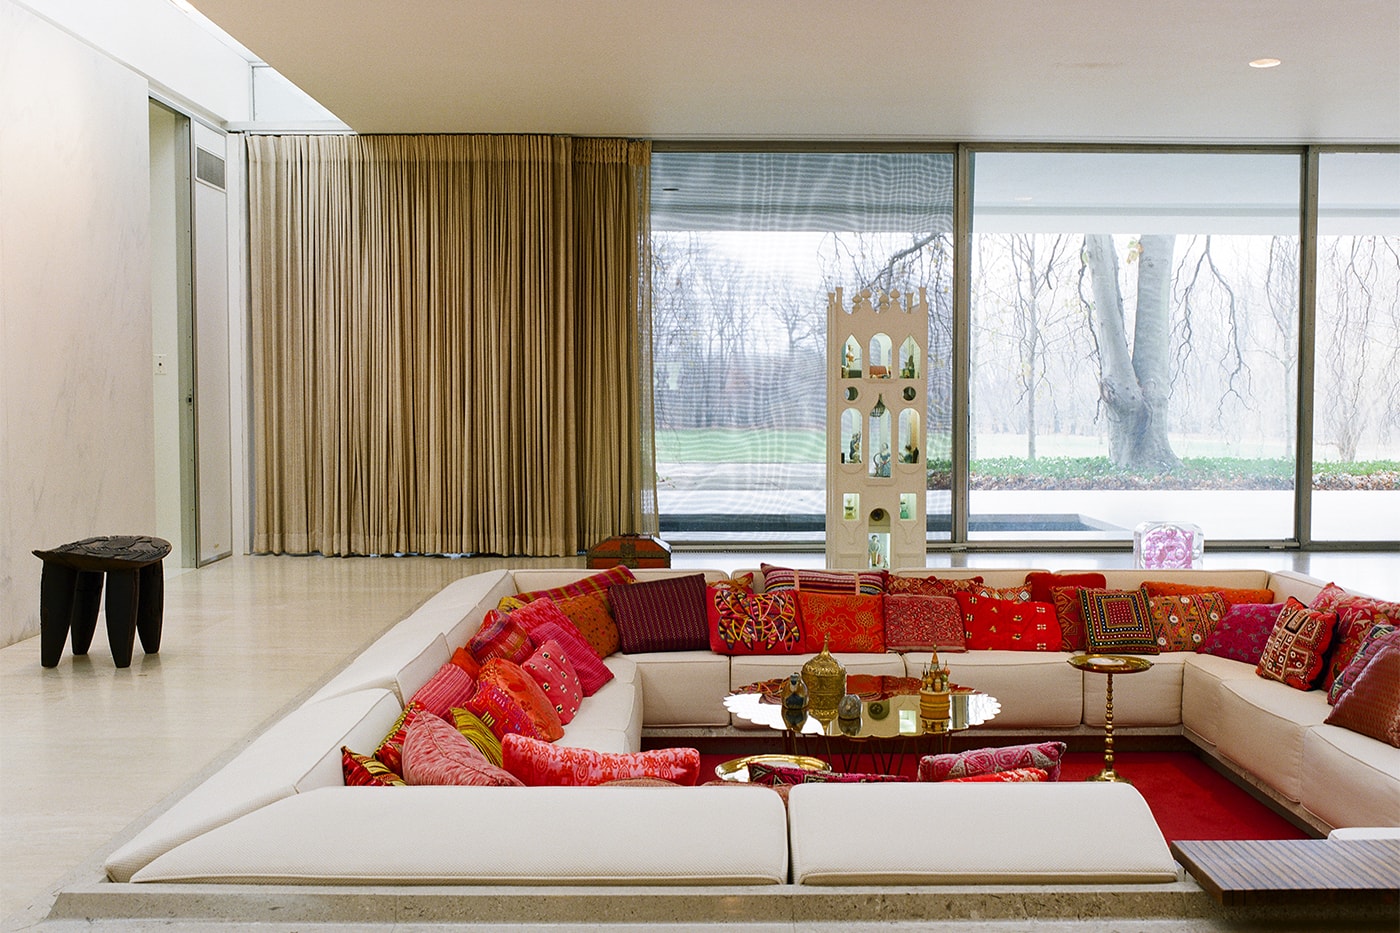 Take a Look Inside Some of the World's Most Impressive Modernist Homes